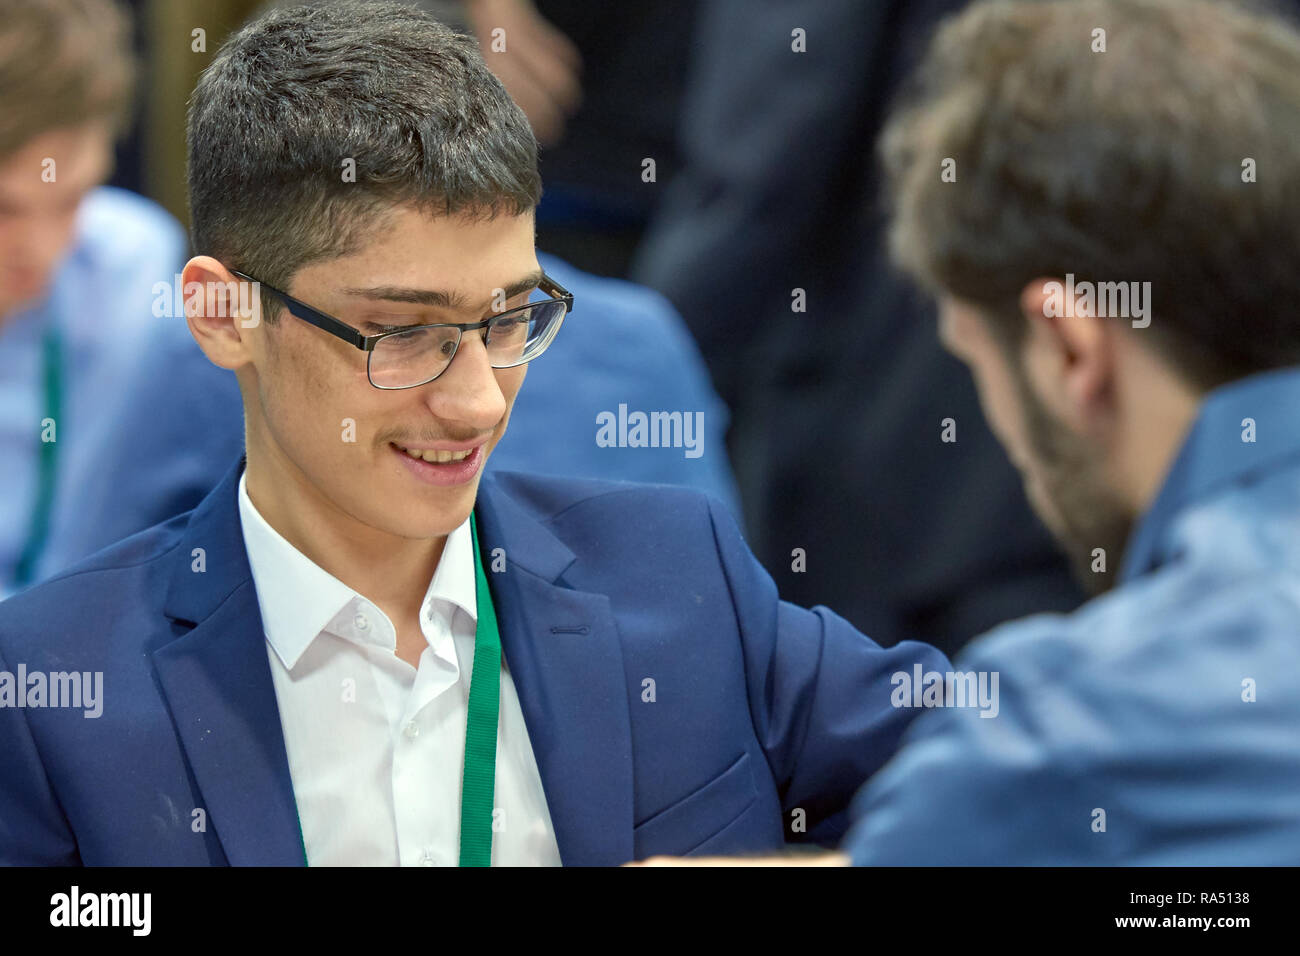 2700chess on X: Meet 16 y/o Alireza Firouzja 🇮🇷 in the 2700 club! He  scored 11.5/13 and TPR of 2800 at the Turkish League @TurkishChess to  become the second youngest chess player